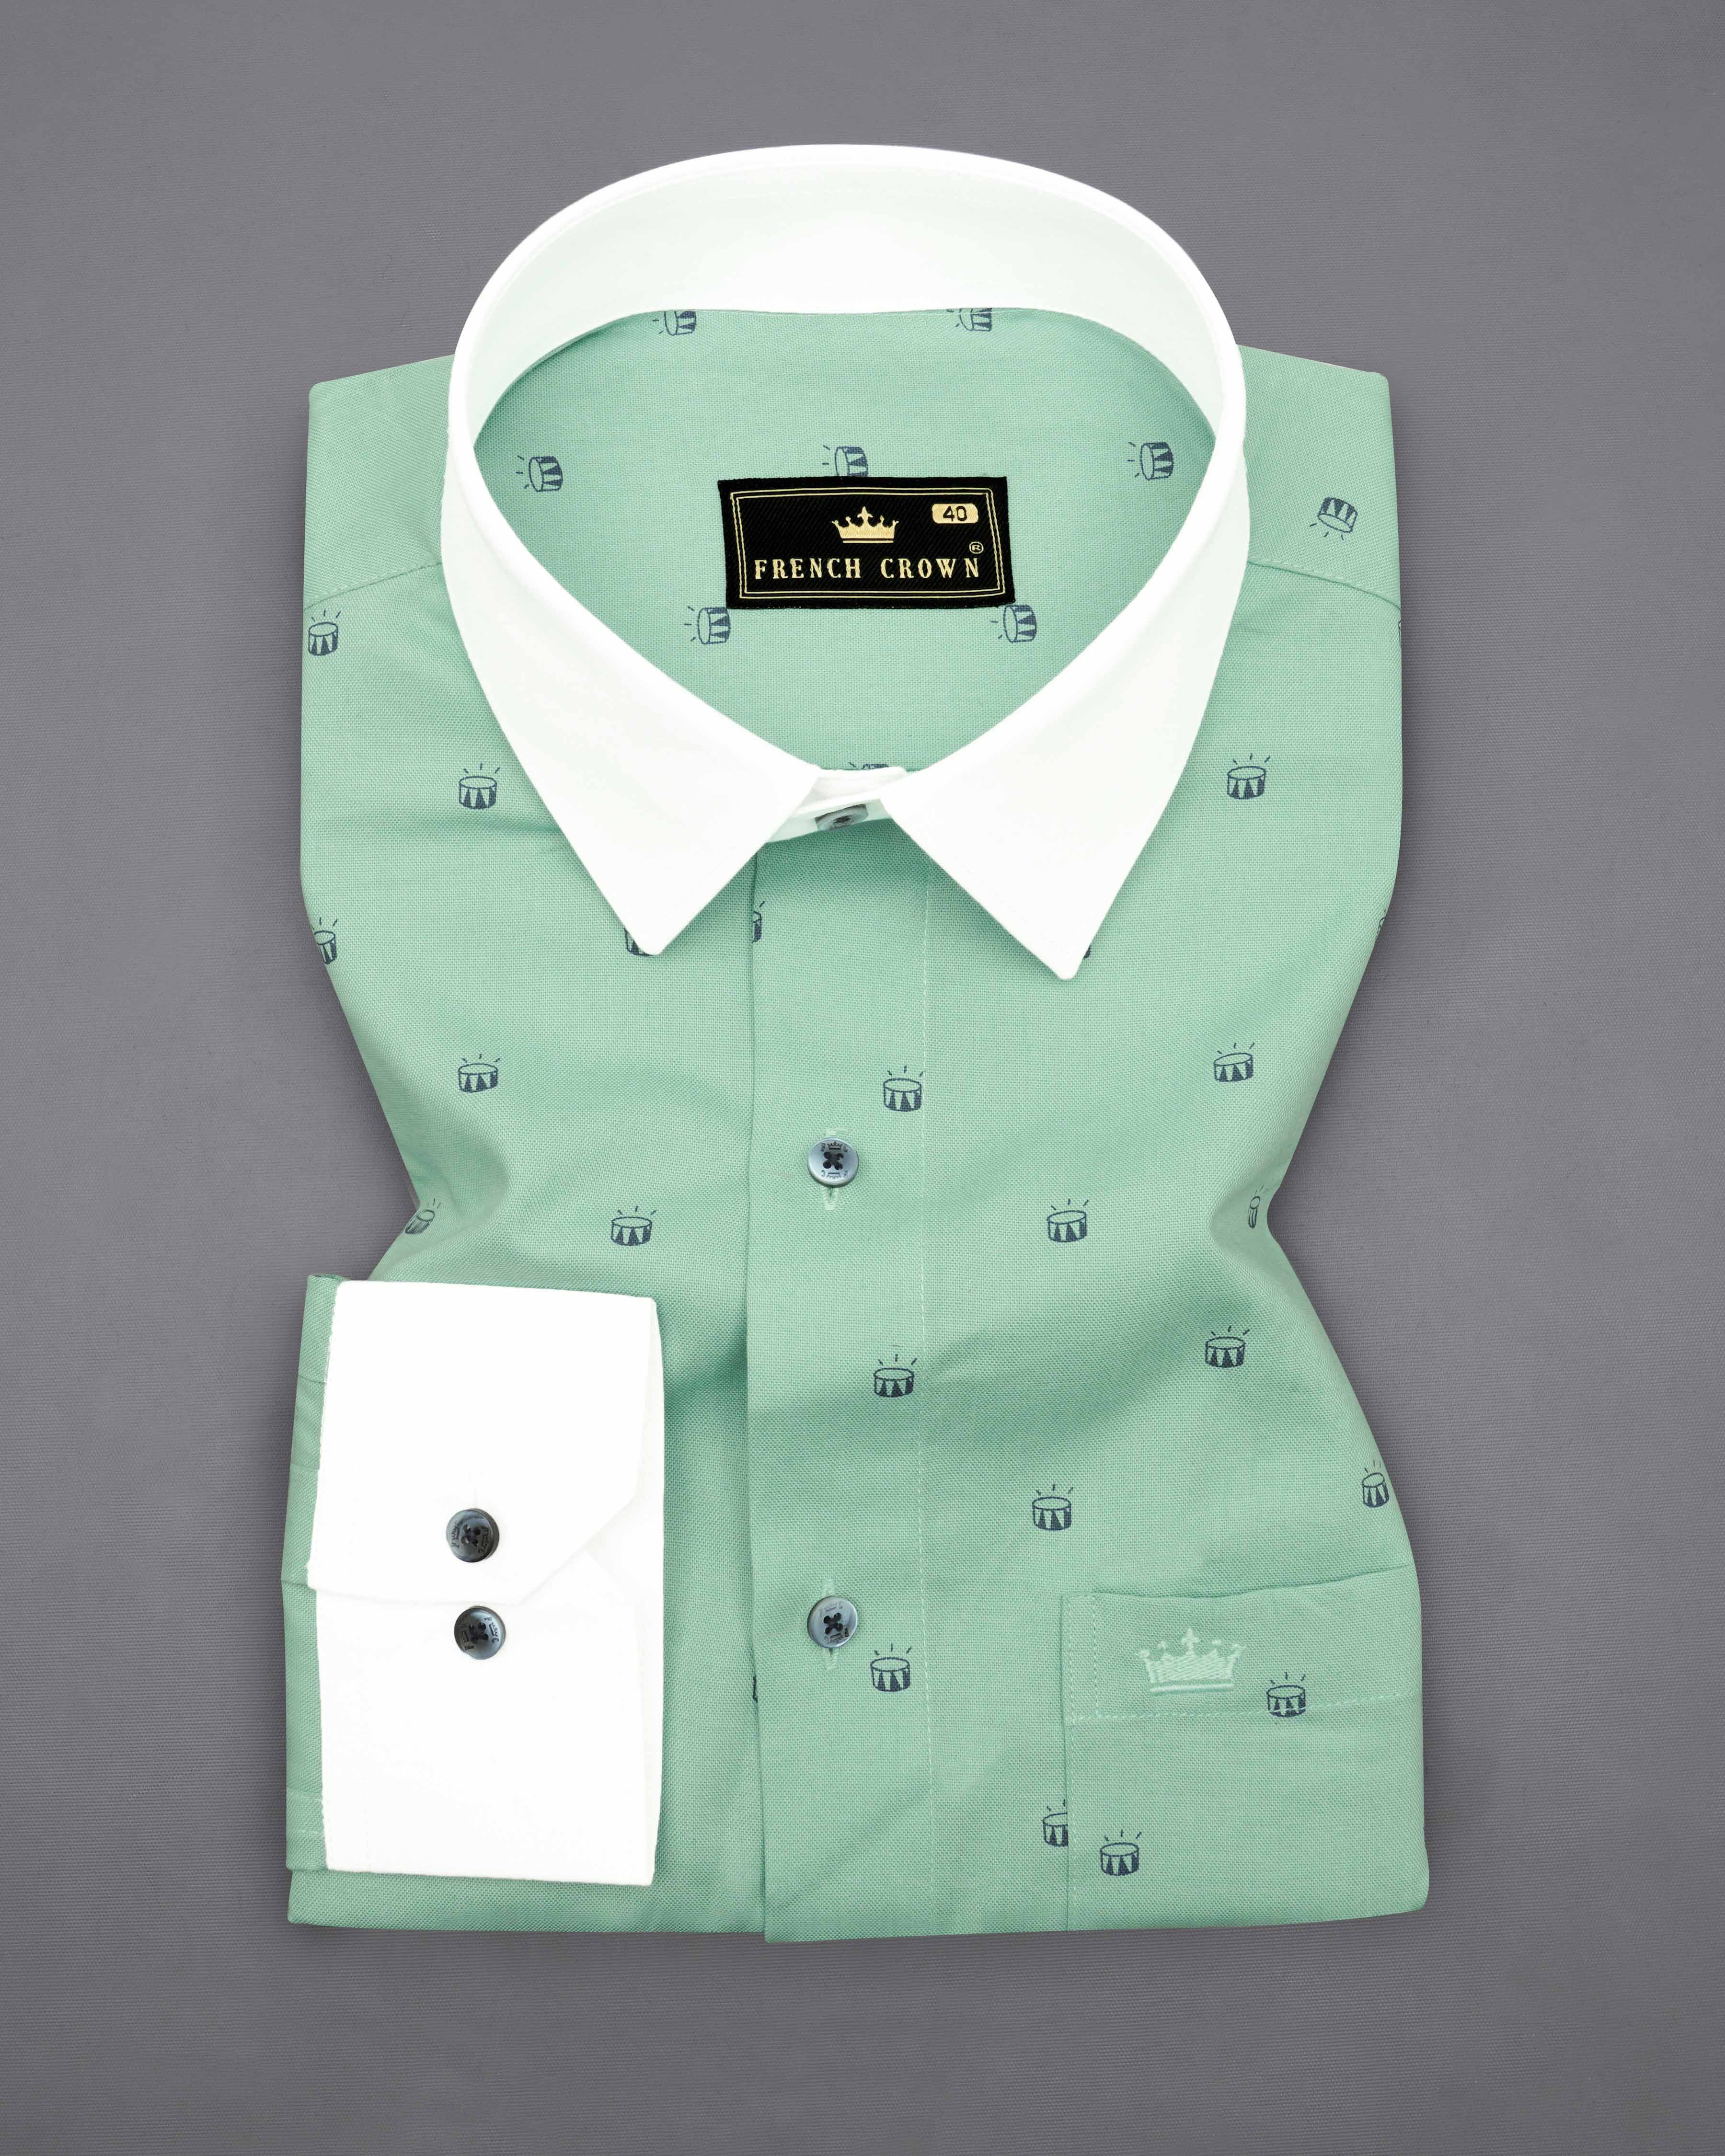 Turquoise Green Drum Printed with White Collar and Cuffs Royal Oxford Shirt 8317-WCC-BLE -38,8317-WCC-BLE -H-38,8317-WCC-BLE -39,8317-WCC-BLE -H-39,8317-WCC-BLE -40,8317-WCC-BLE -H-40,8317-WCC-BLE -42,8317-WCC-BLE -H-42,8317-WCC-BLE -44,8317-WCC-BLE -H-44,8317-WCC-BLE -46,8317-WCC-BLE -H-46,8317-WCC-BLE -48,8317-WCC-BLE -H-48,8317-WCC-BLE -50,8317-WCC-BLE -H-50,8317-WCC-BLE -52,8317-WCC-BLE -H-52